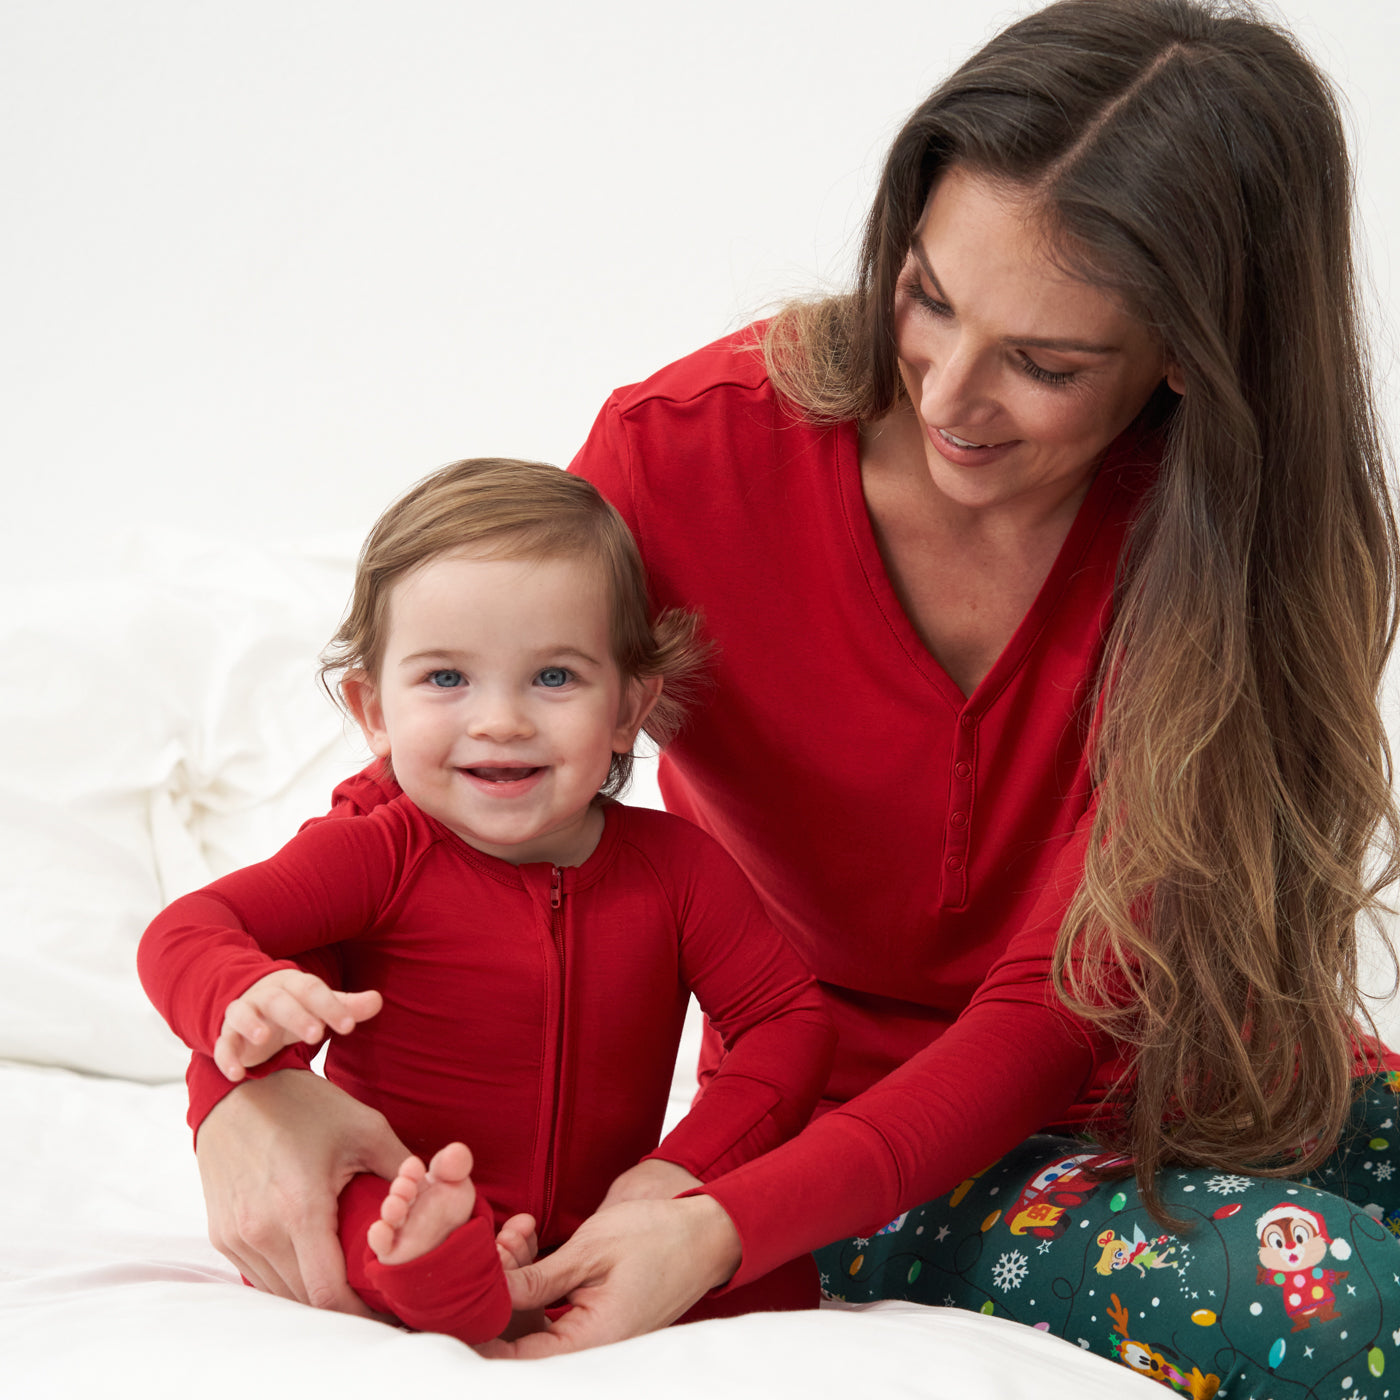 Mother and child sitting on a bed wearing matching Holiday pajamas